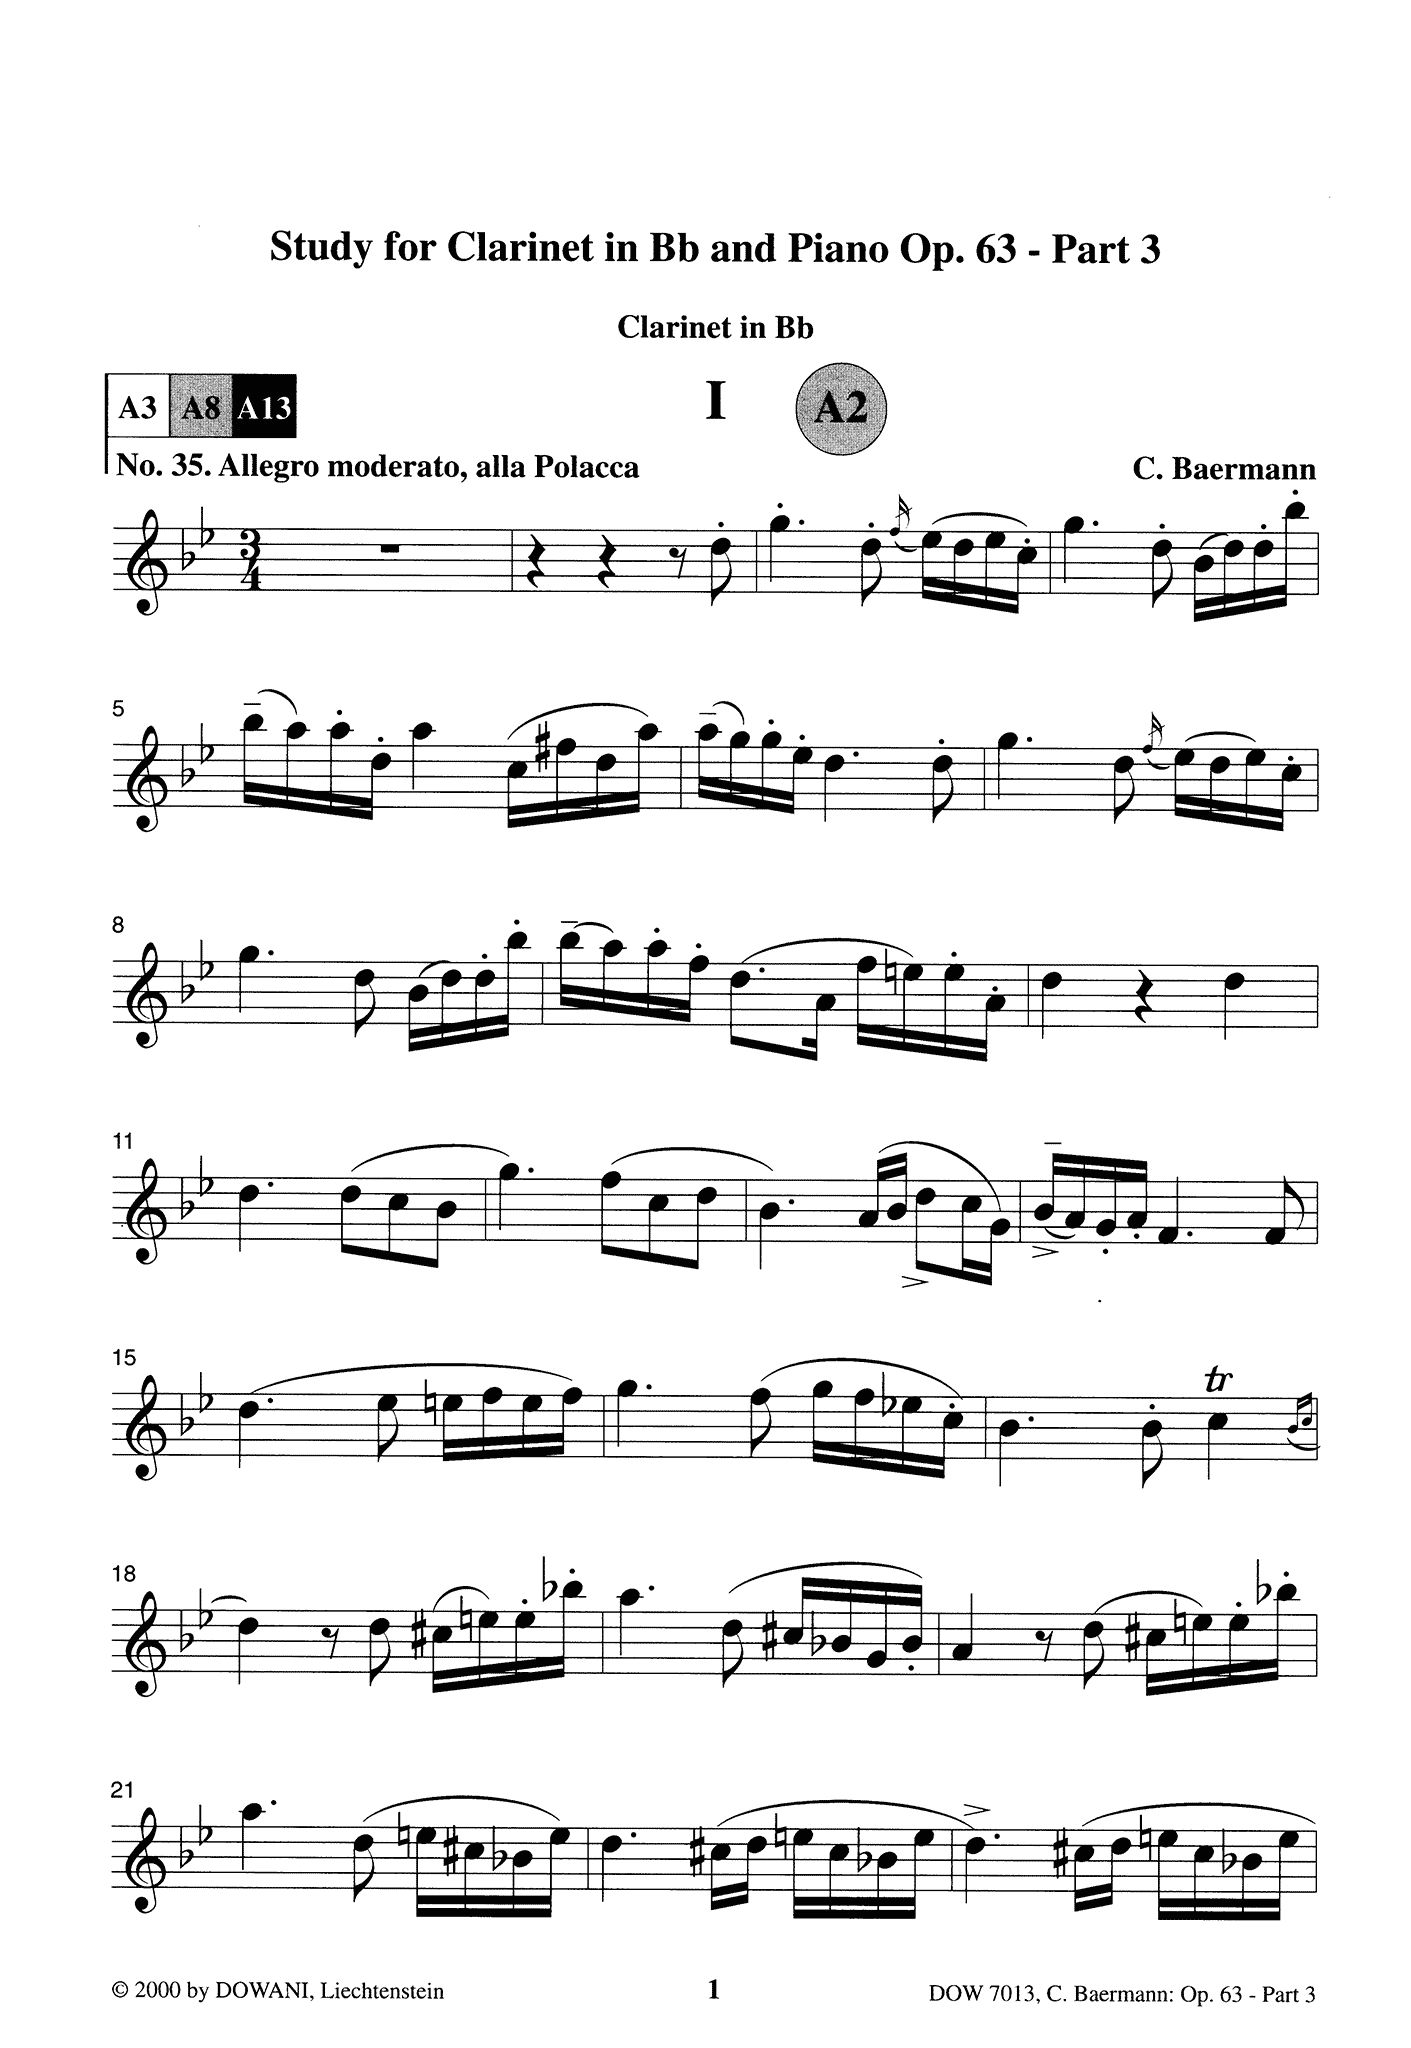 Clarinet Method, Op. 63, Div. II: Part 3 of 3 Clarinet part Page 1